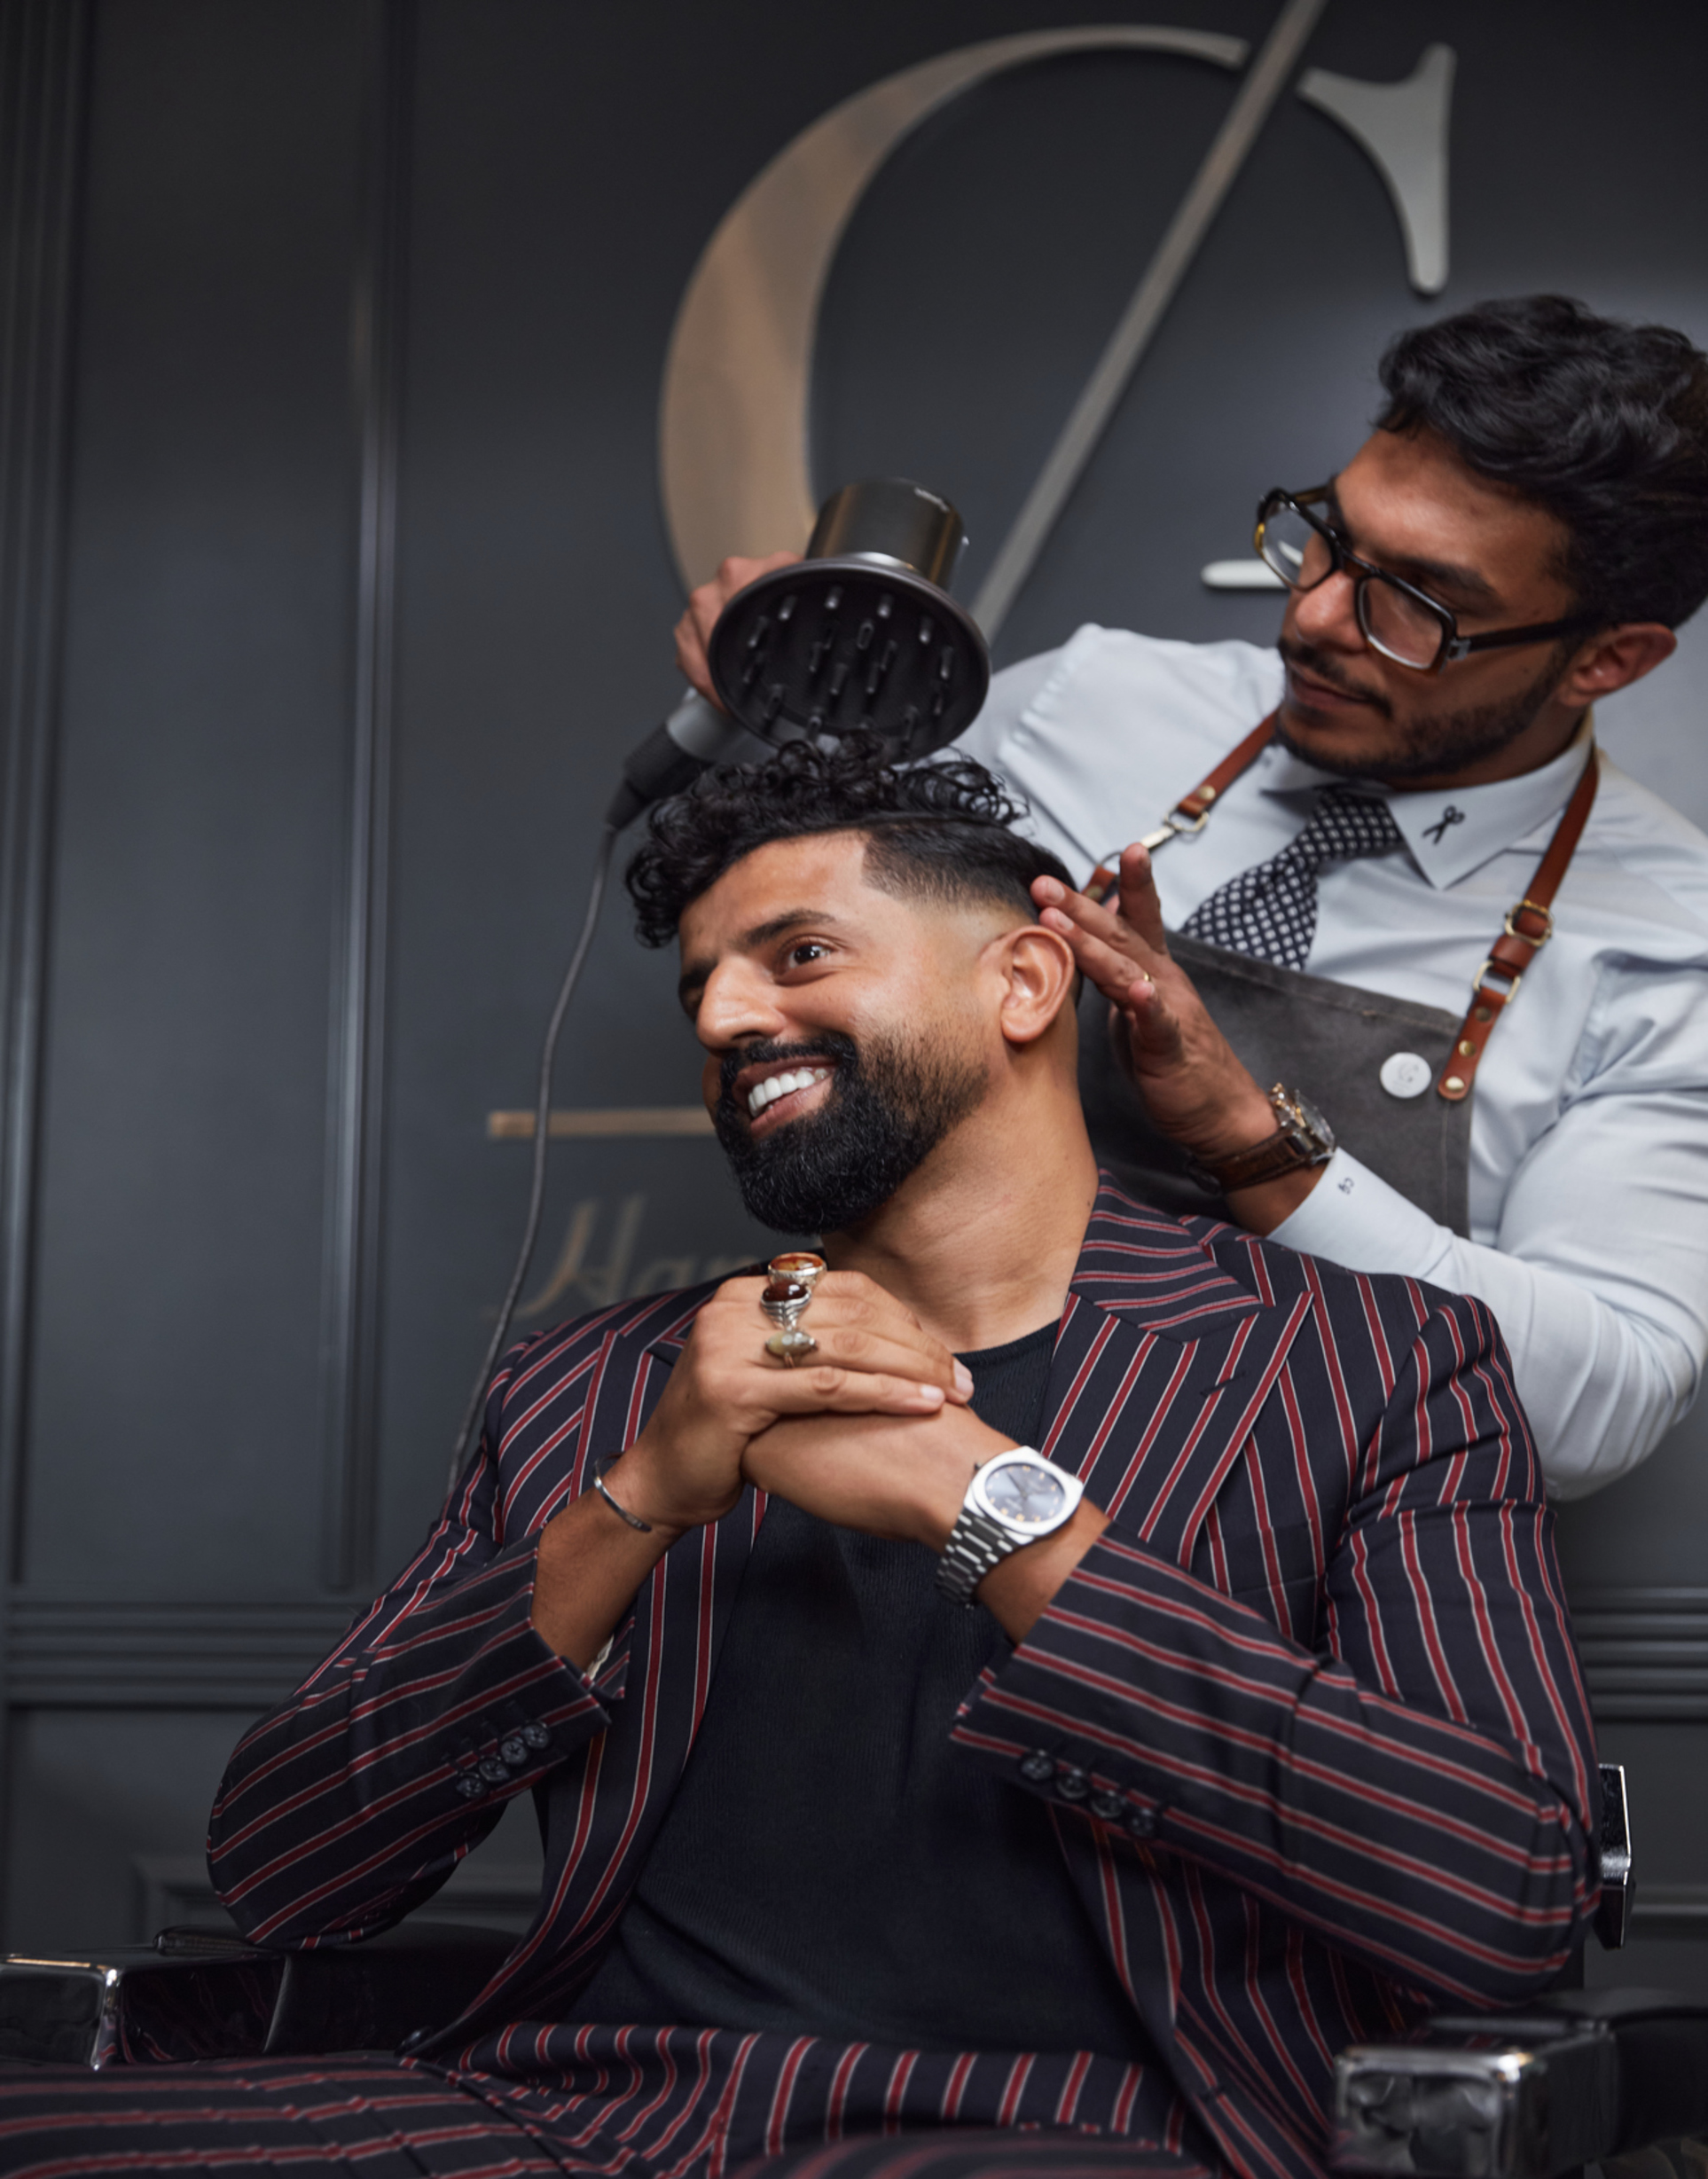 How To Get The Haircut You Want Get the Most Out of Your Visit to CG Barbershop